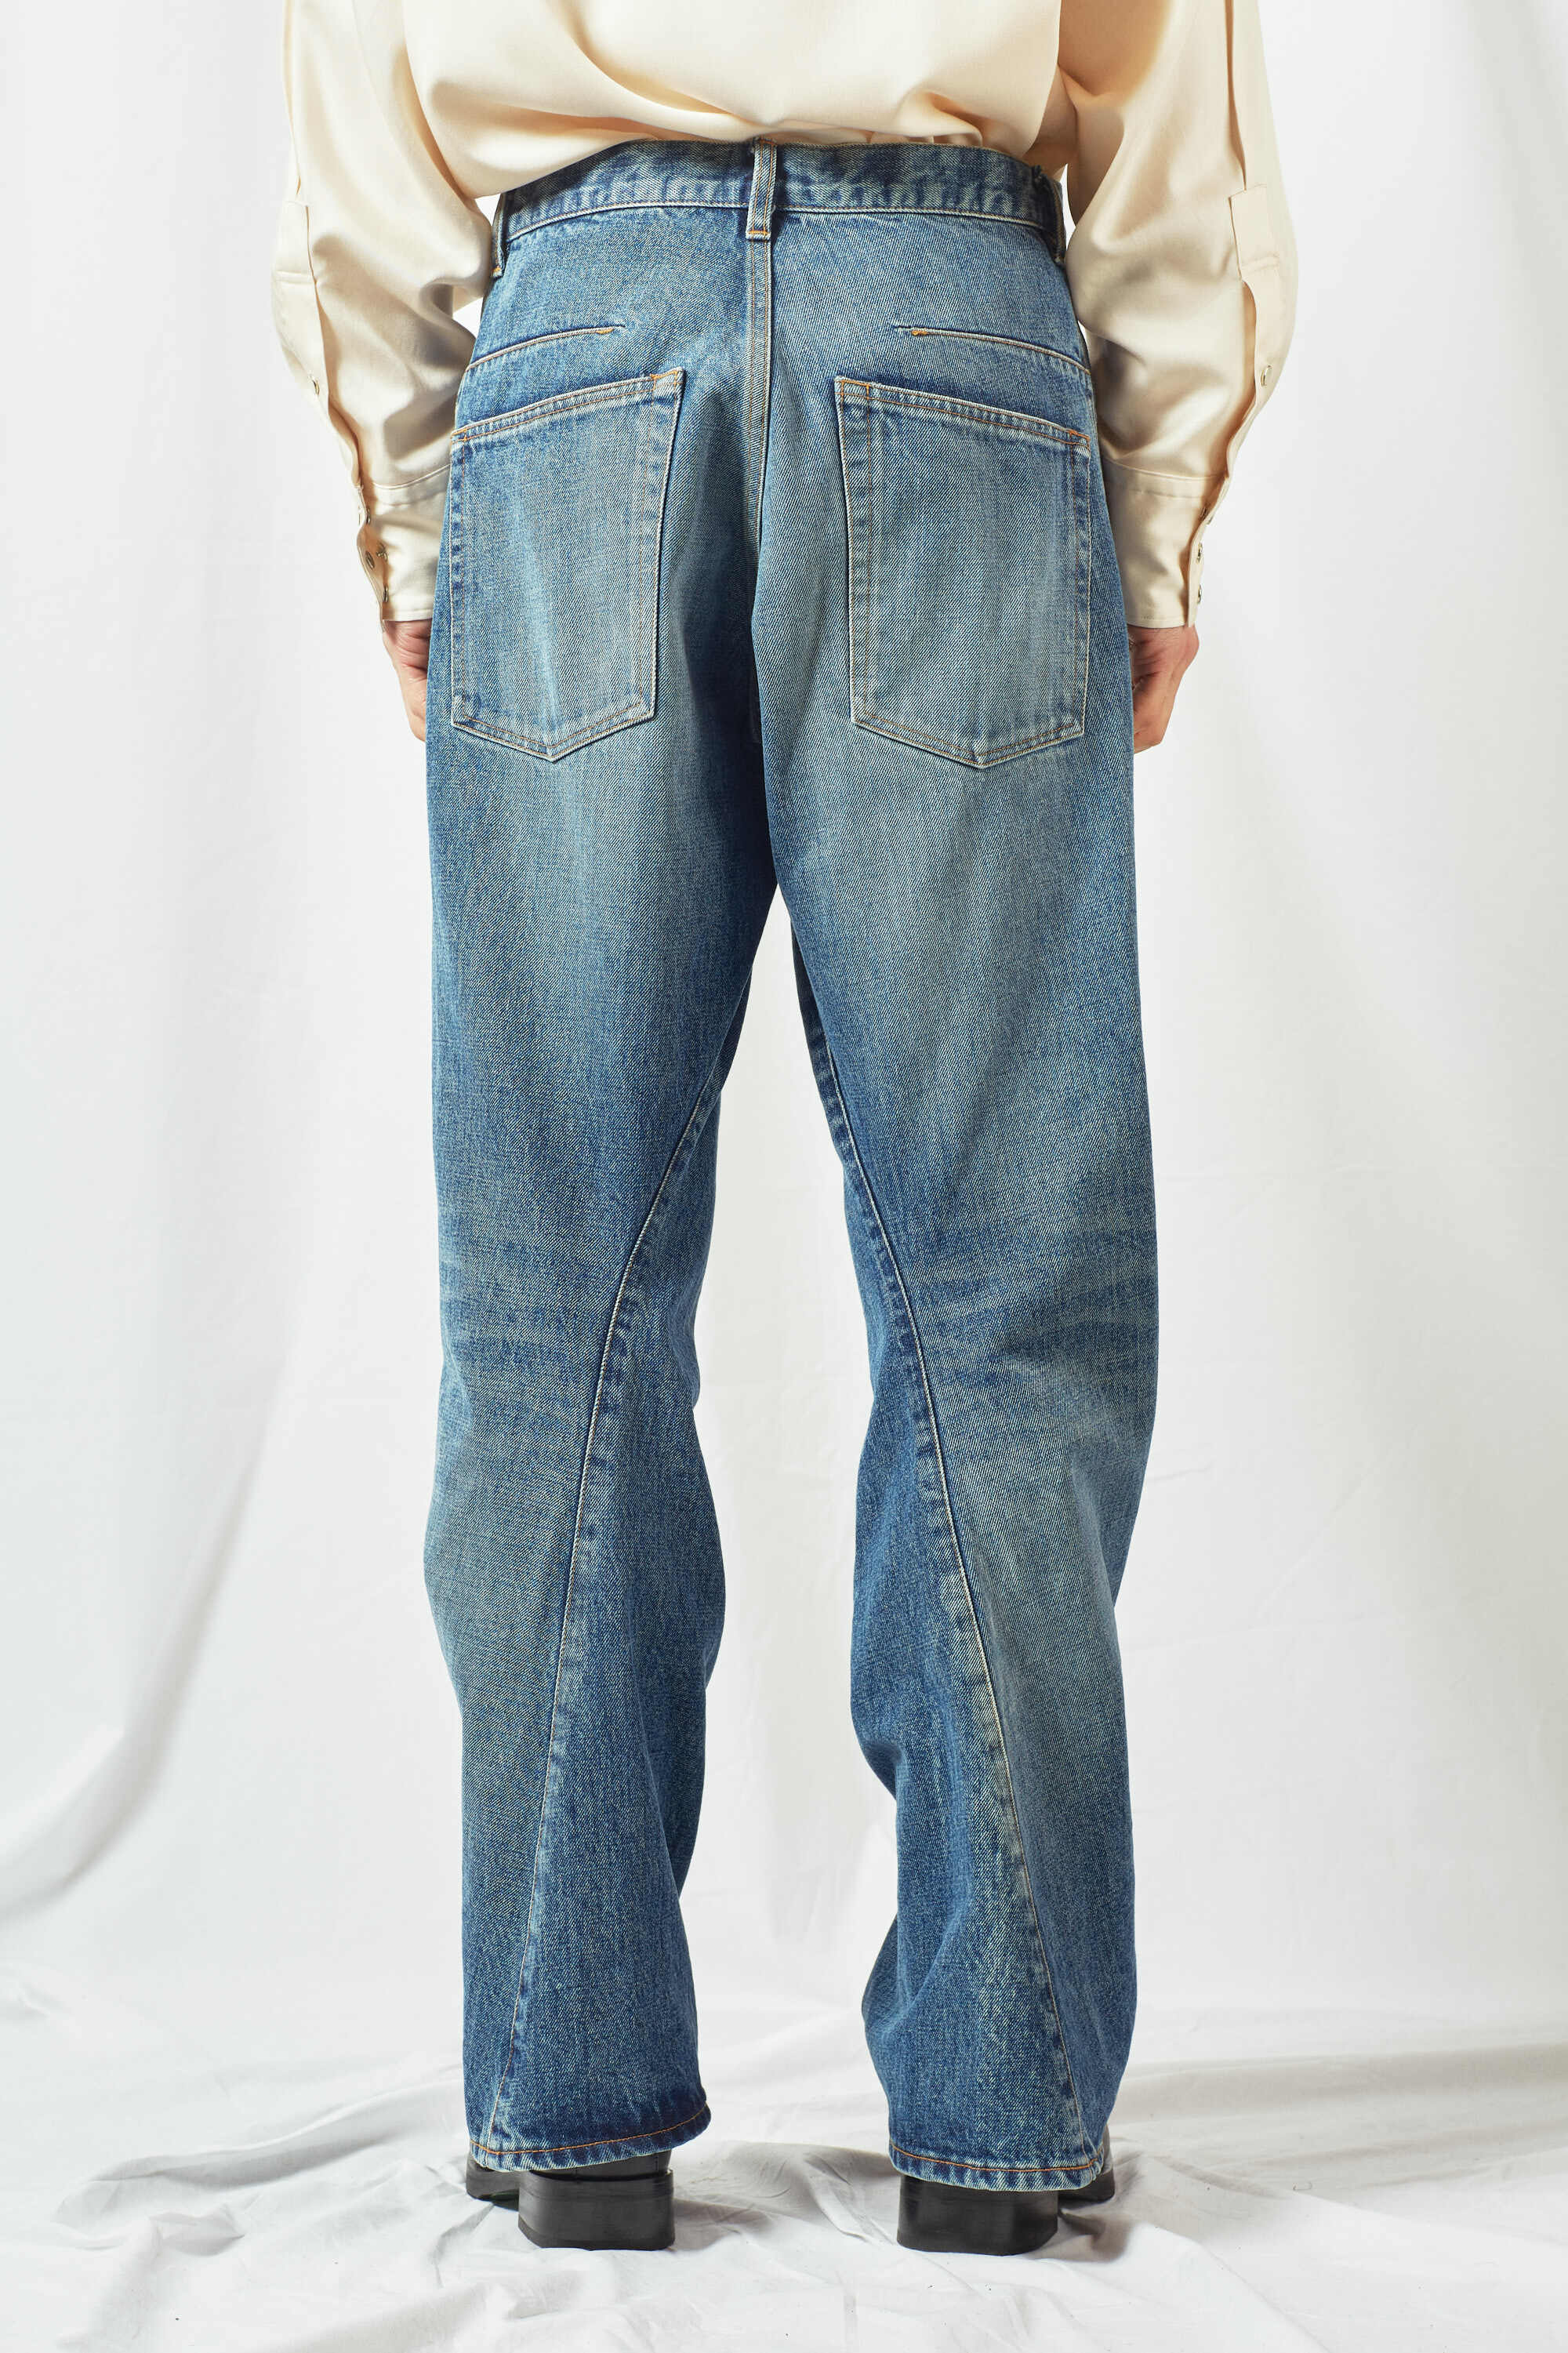 NVRFRGT 3D Twisted Jeans 22ss 新品未使用-